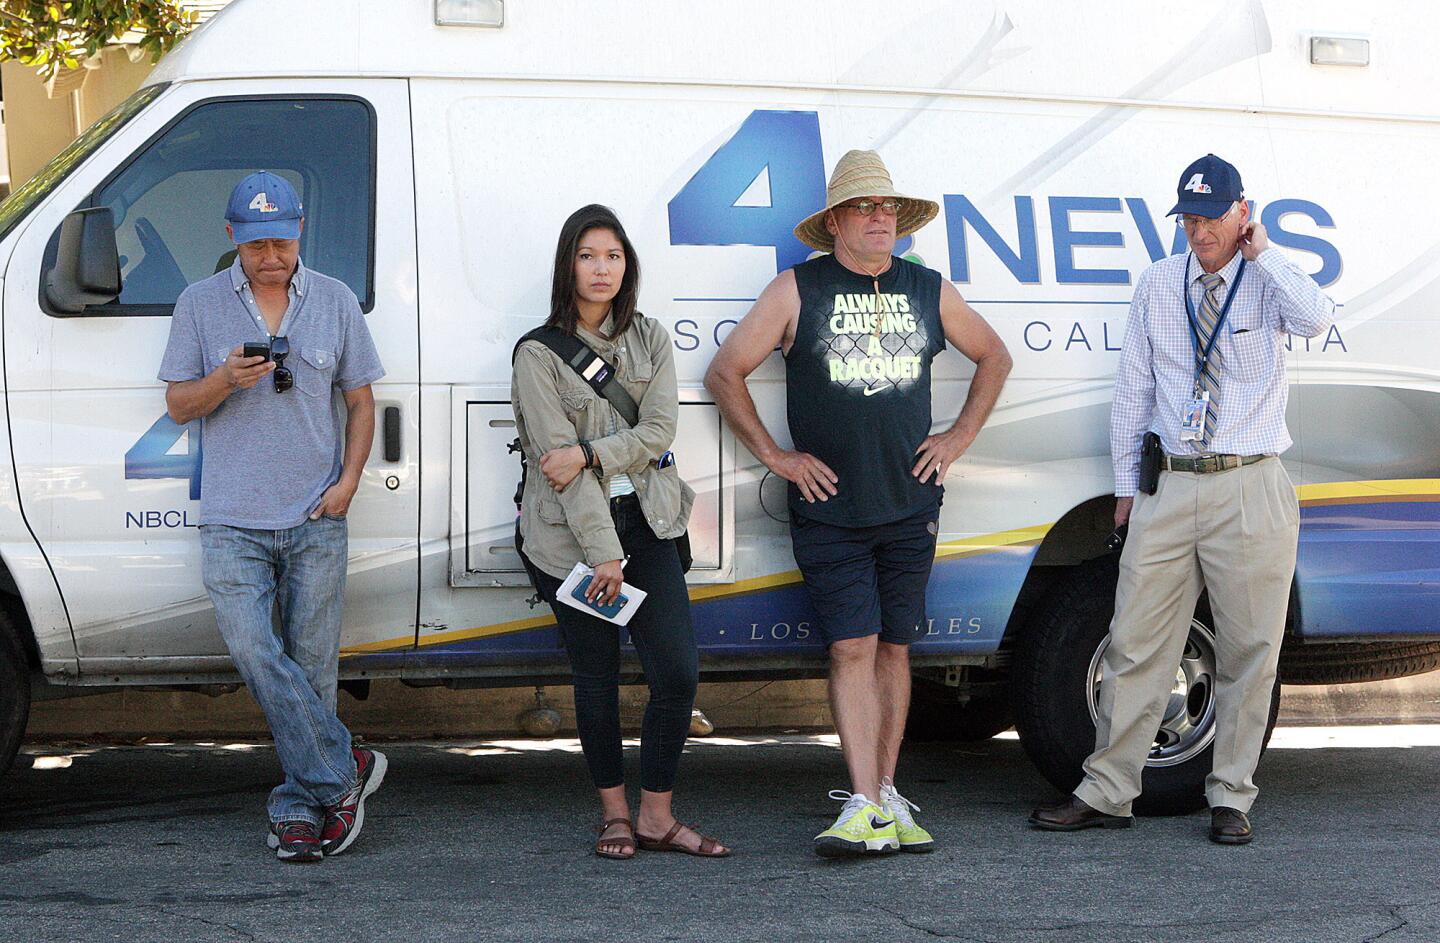 Reporters and TV news crew members stand in the shade for long day at the scene of a murder-suicide on the 5000 block of Crown Avenue in La Cañada Flintridge on Monday, Sept. 7, 2015. On Sunday night, a 5-year veteran of the Los Angeles County Fire Department shot and killed his wife, a 2-year veteran of the Sheriff's Department. He then killed himself at a county Fire Department facility in Pacoima, according to officials.